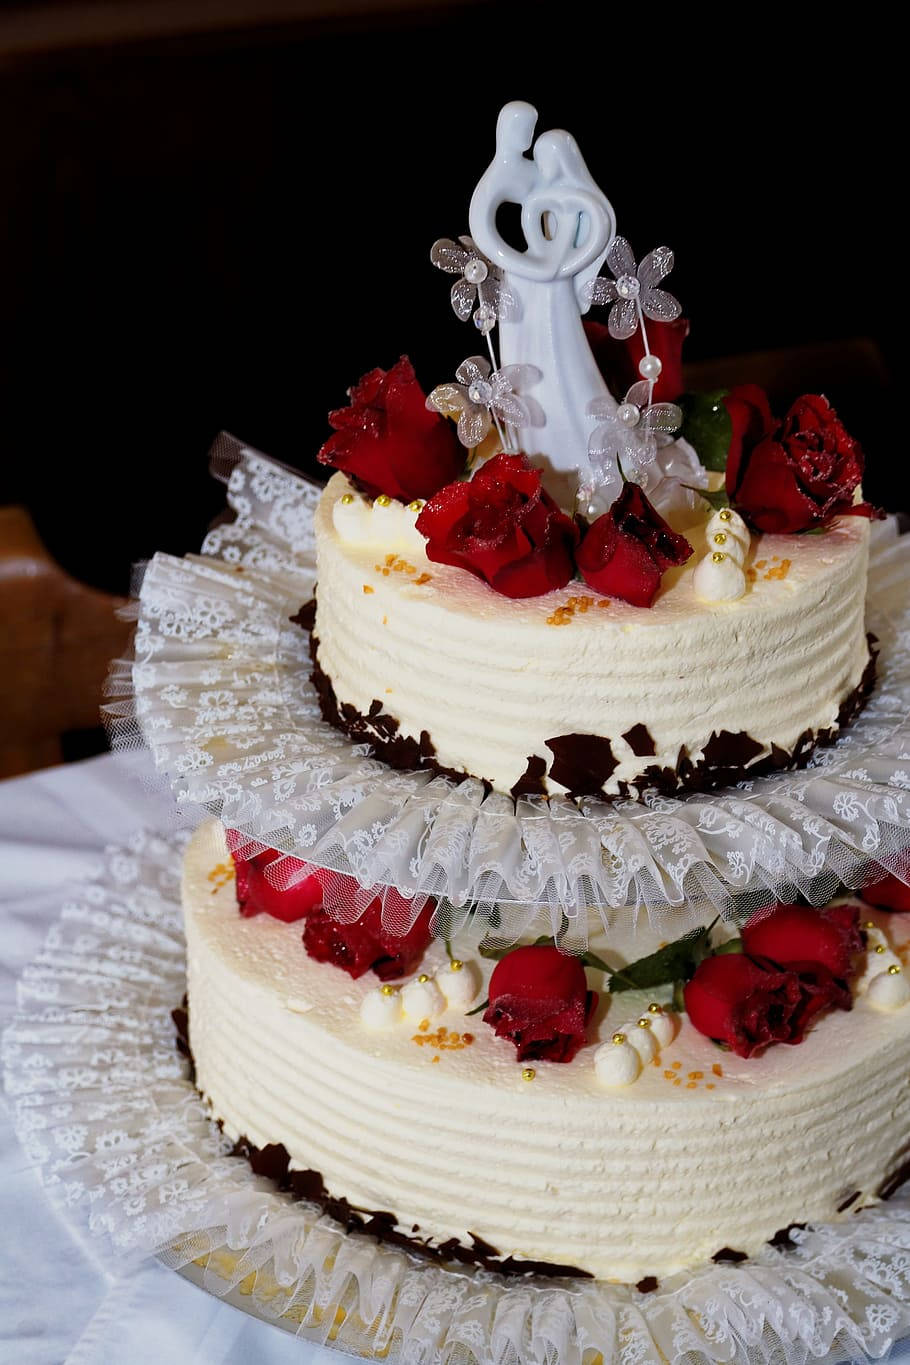 Two Tier Wedding Cake With Roses And Porcelain Figurine Wallpaper